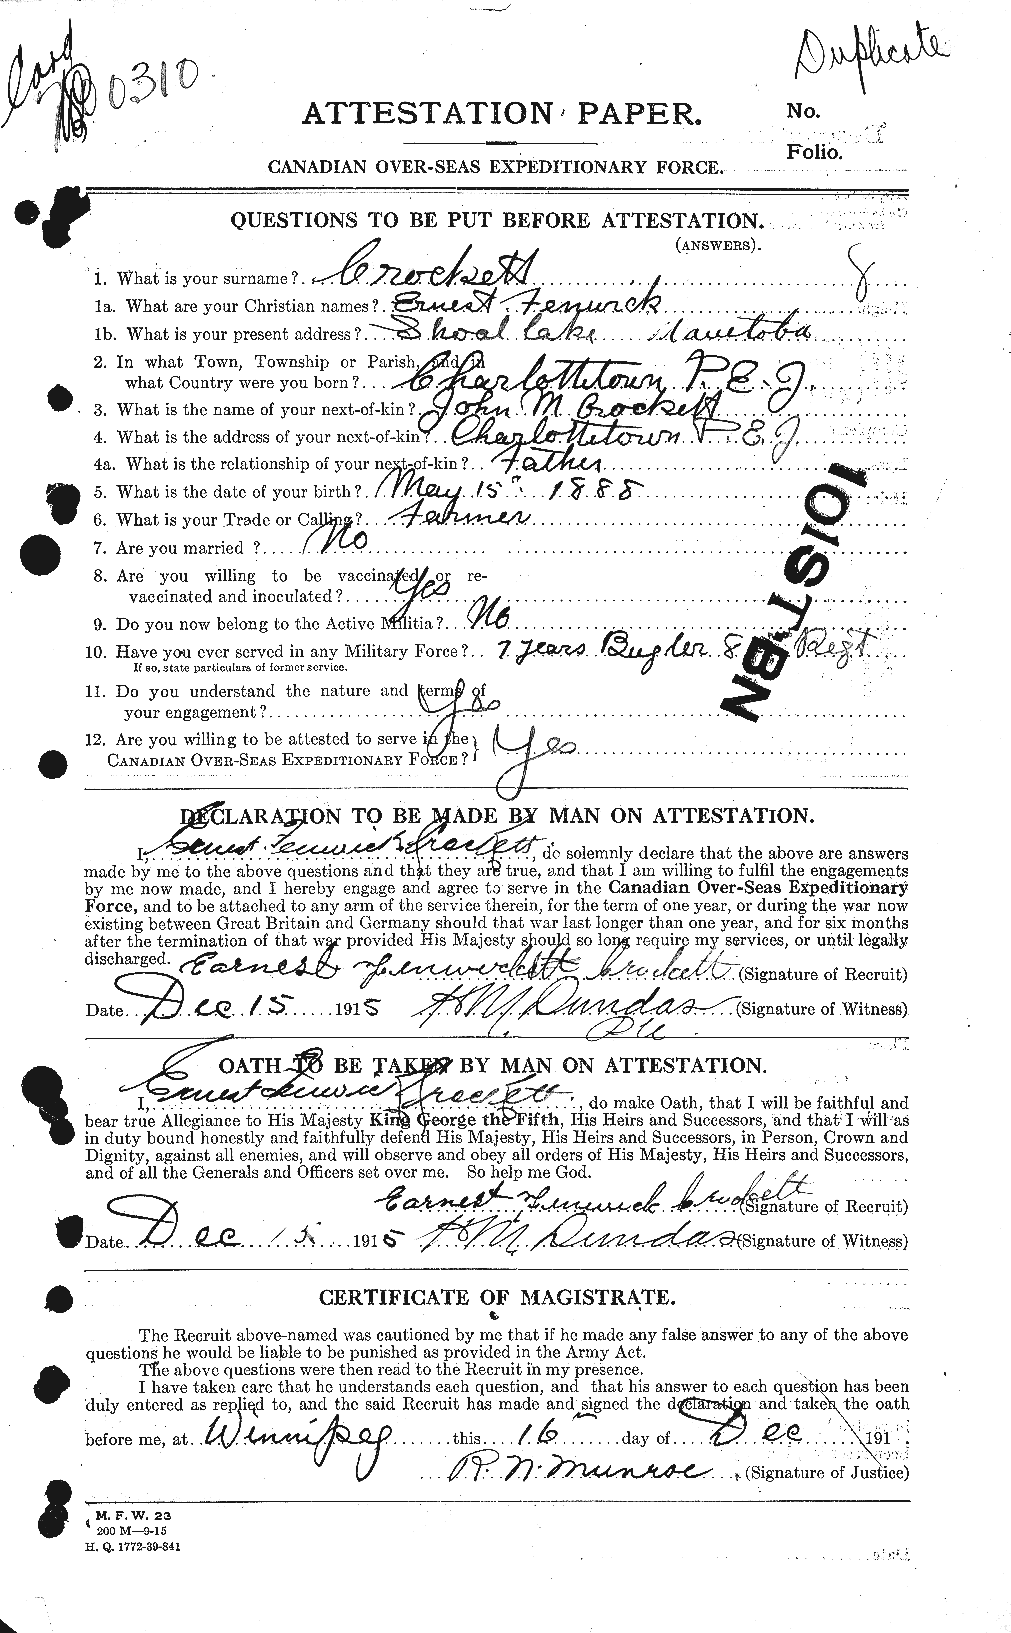 Personnel Records of the First World War - CEF 064716a